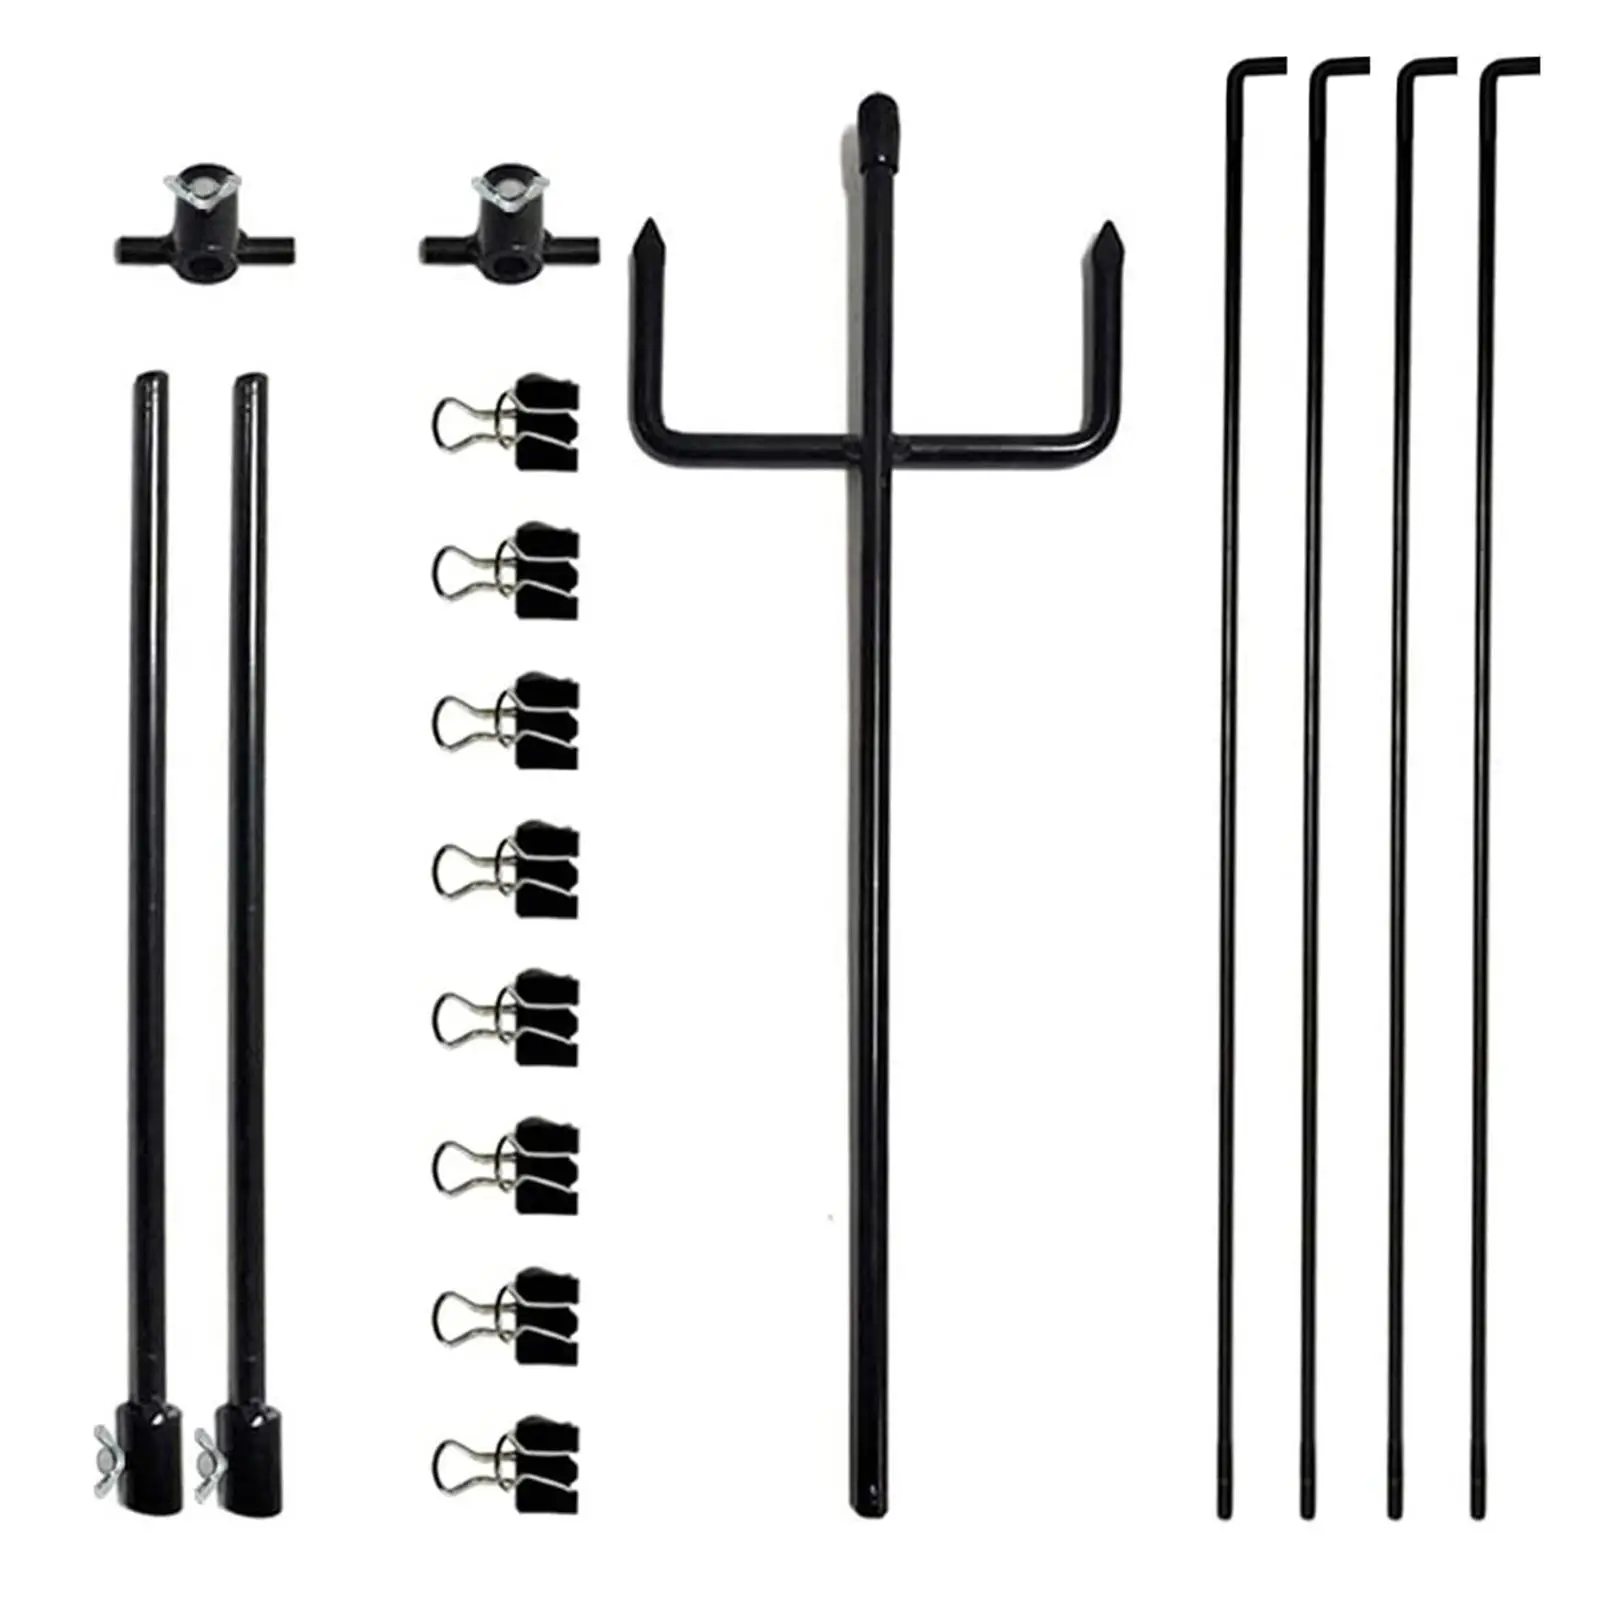 Target Stand Holder Garden Supportories Outdoors Activities Portable Steel T Shape Rack with 8 Clips Paper Target Stand Hunting